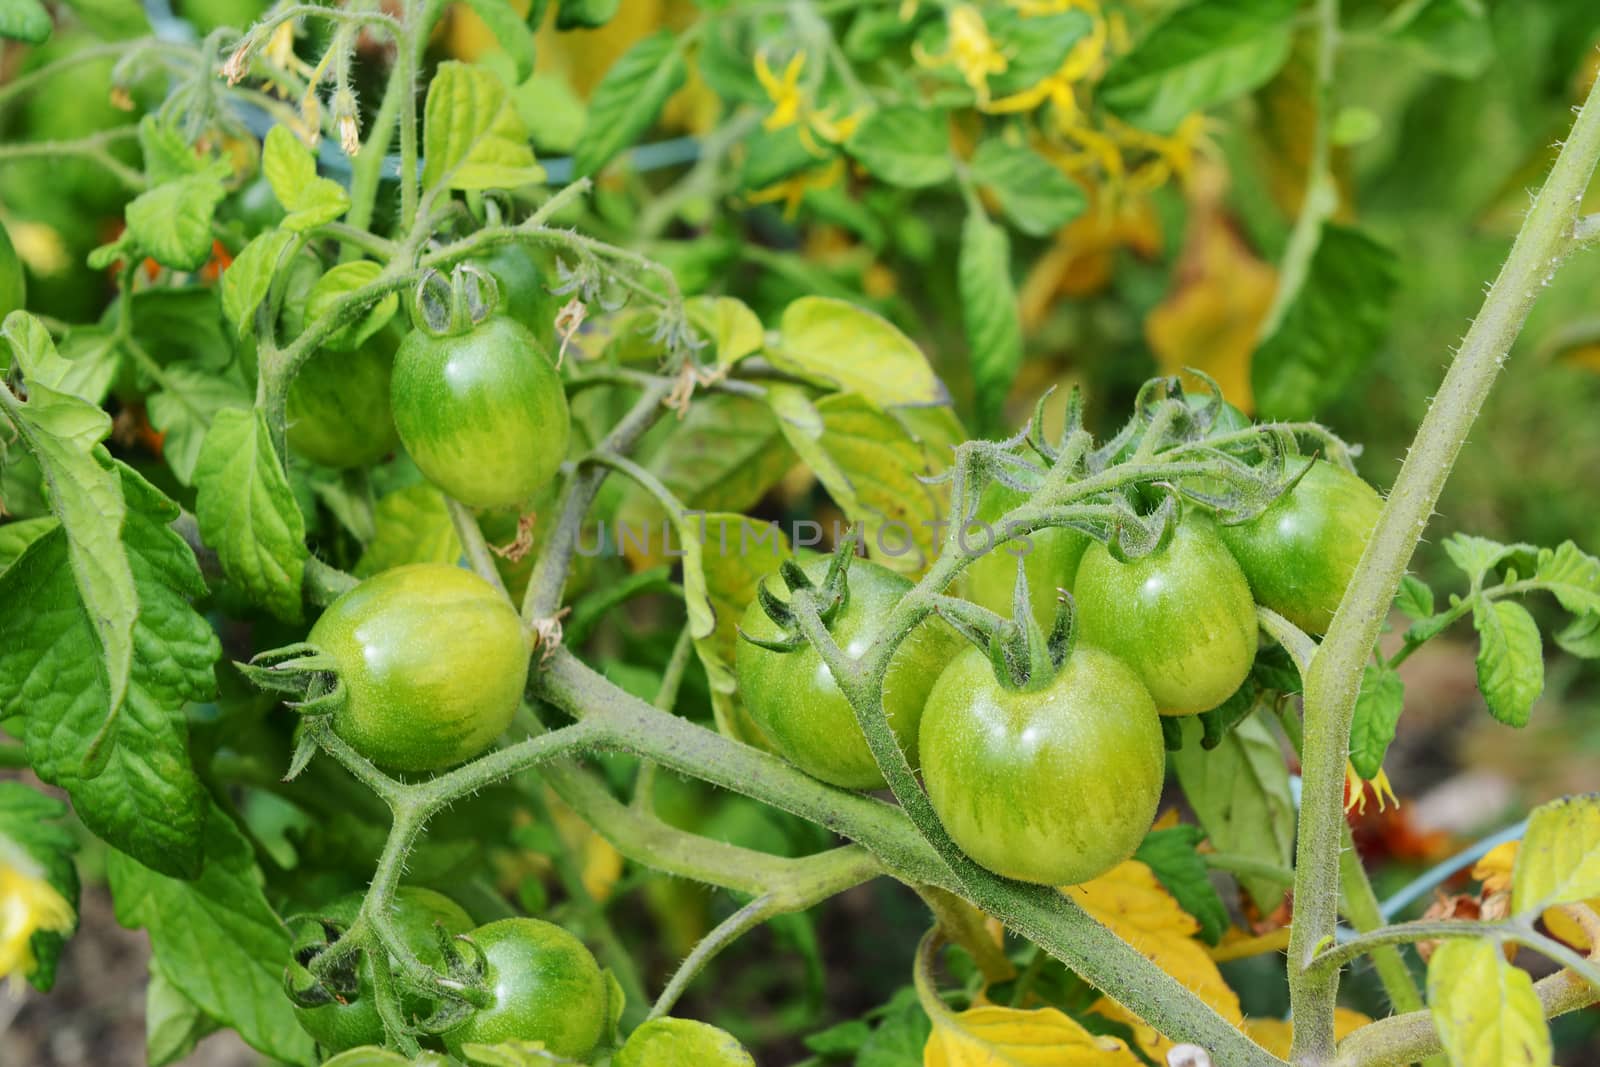 Green tomatoes - Red Alert variety - form on the vine by sarahdoow